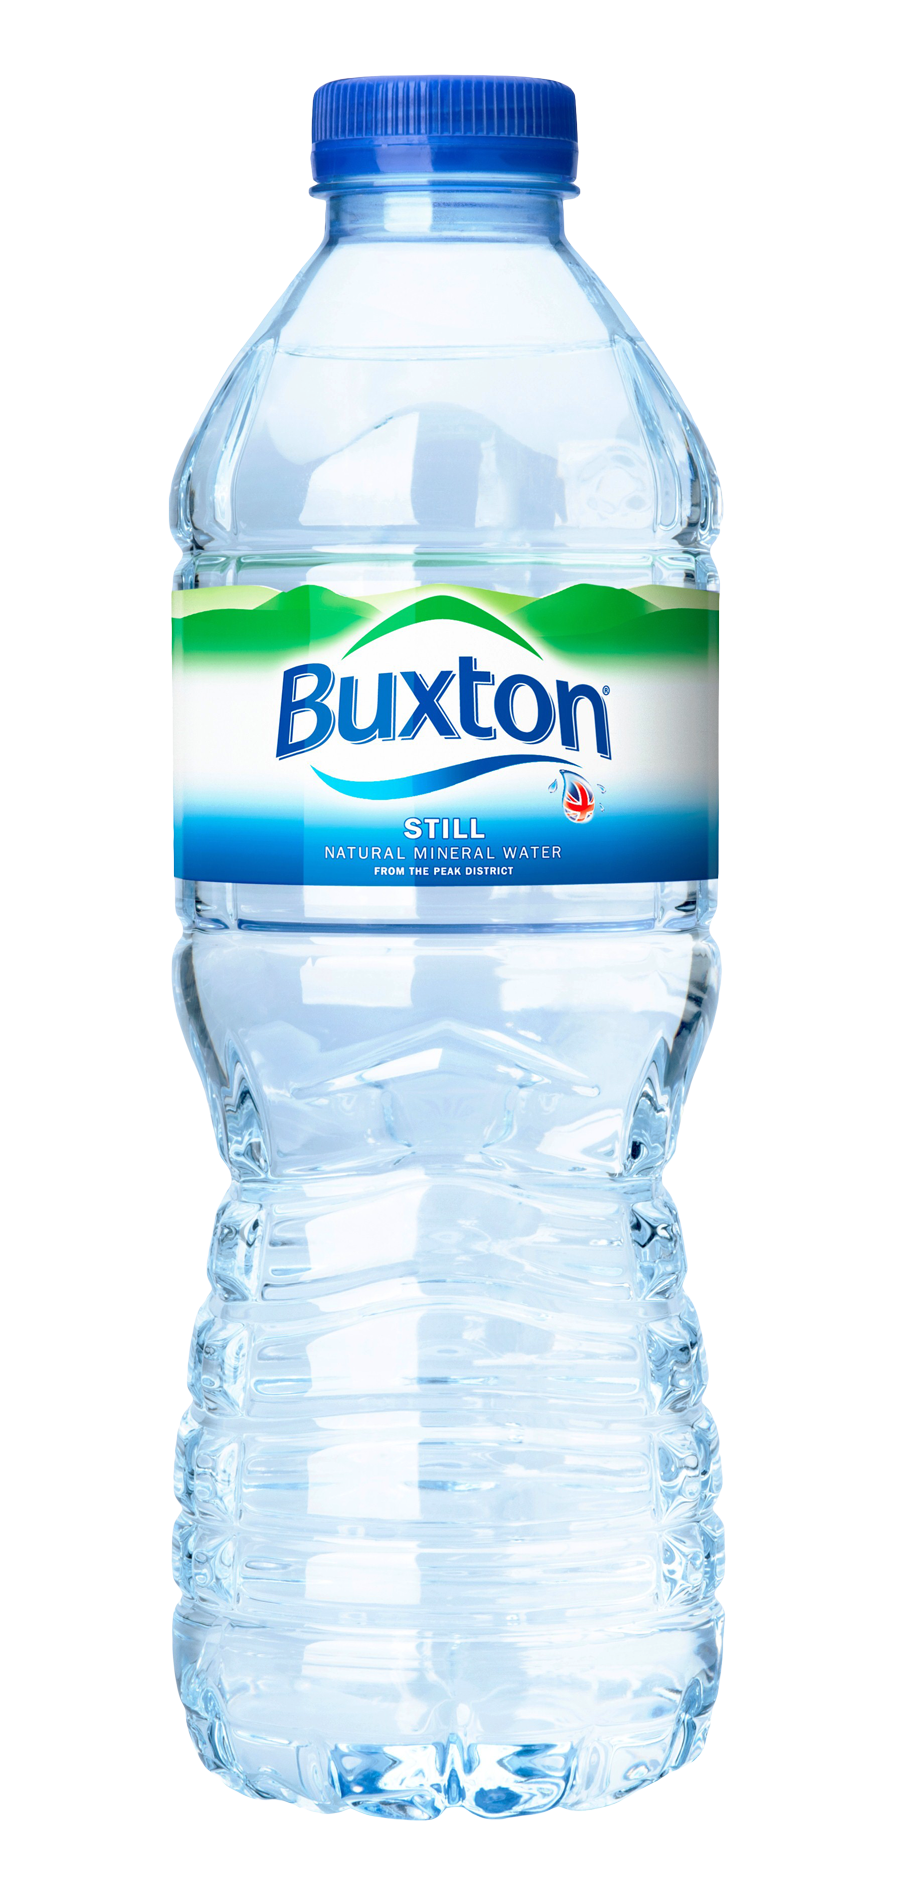 Buxton brand plastic water bottle PNG image #48934 - Free Icons and PNG